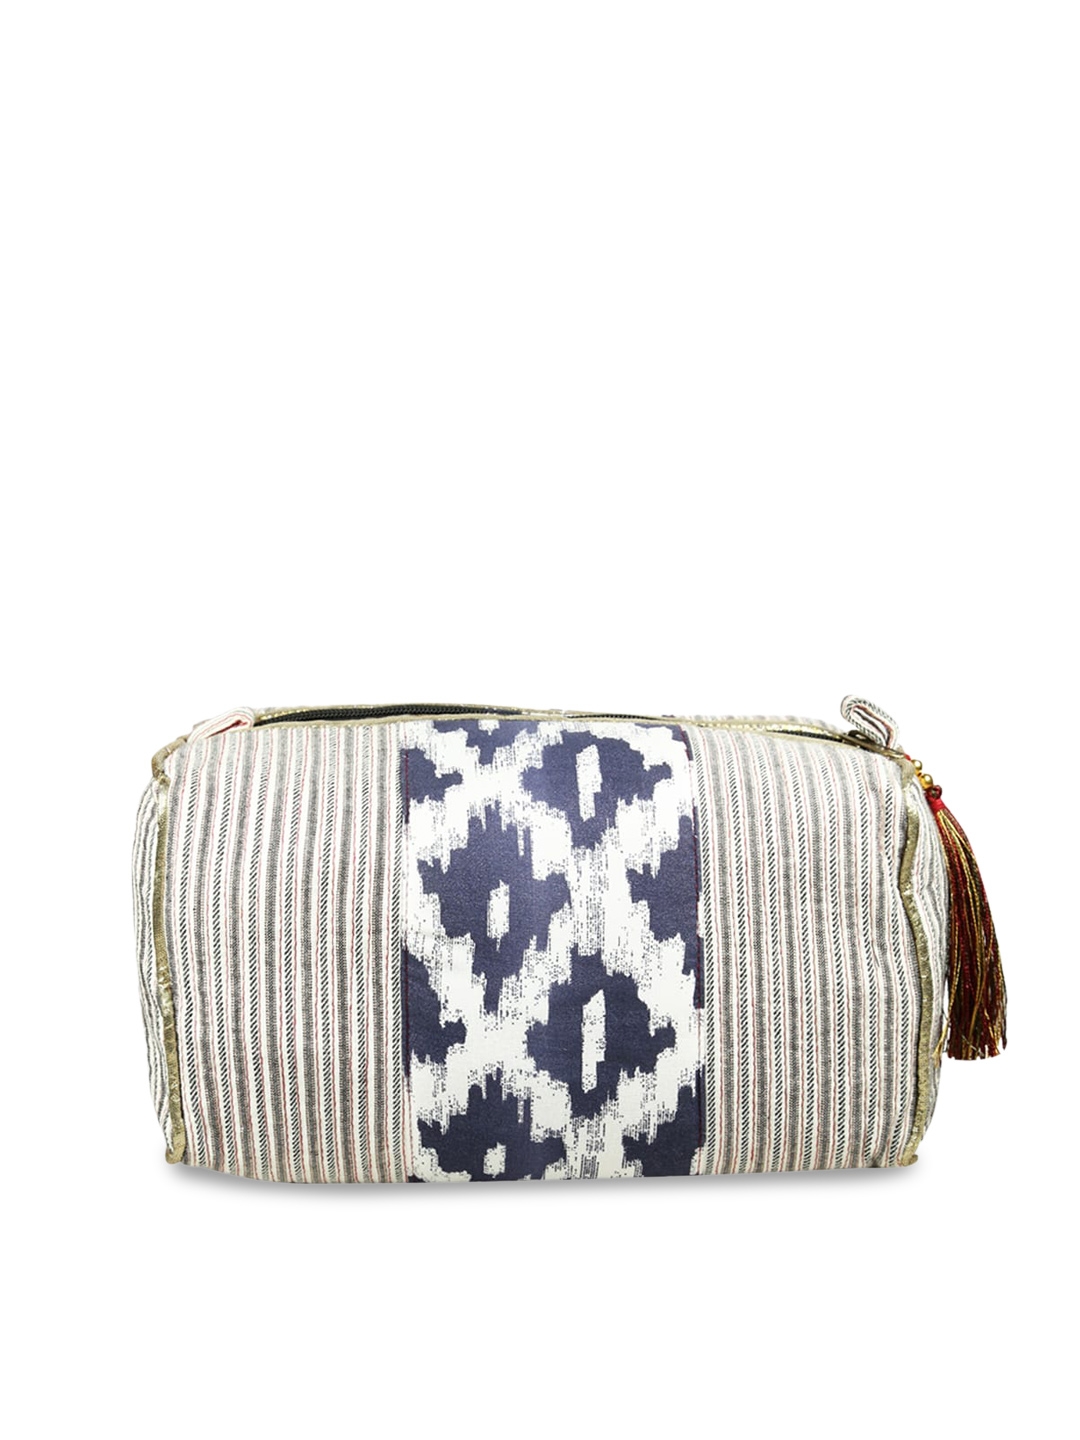 Style SHOES White   Navy Blue Printed Toiletry Kit Pouch